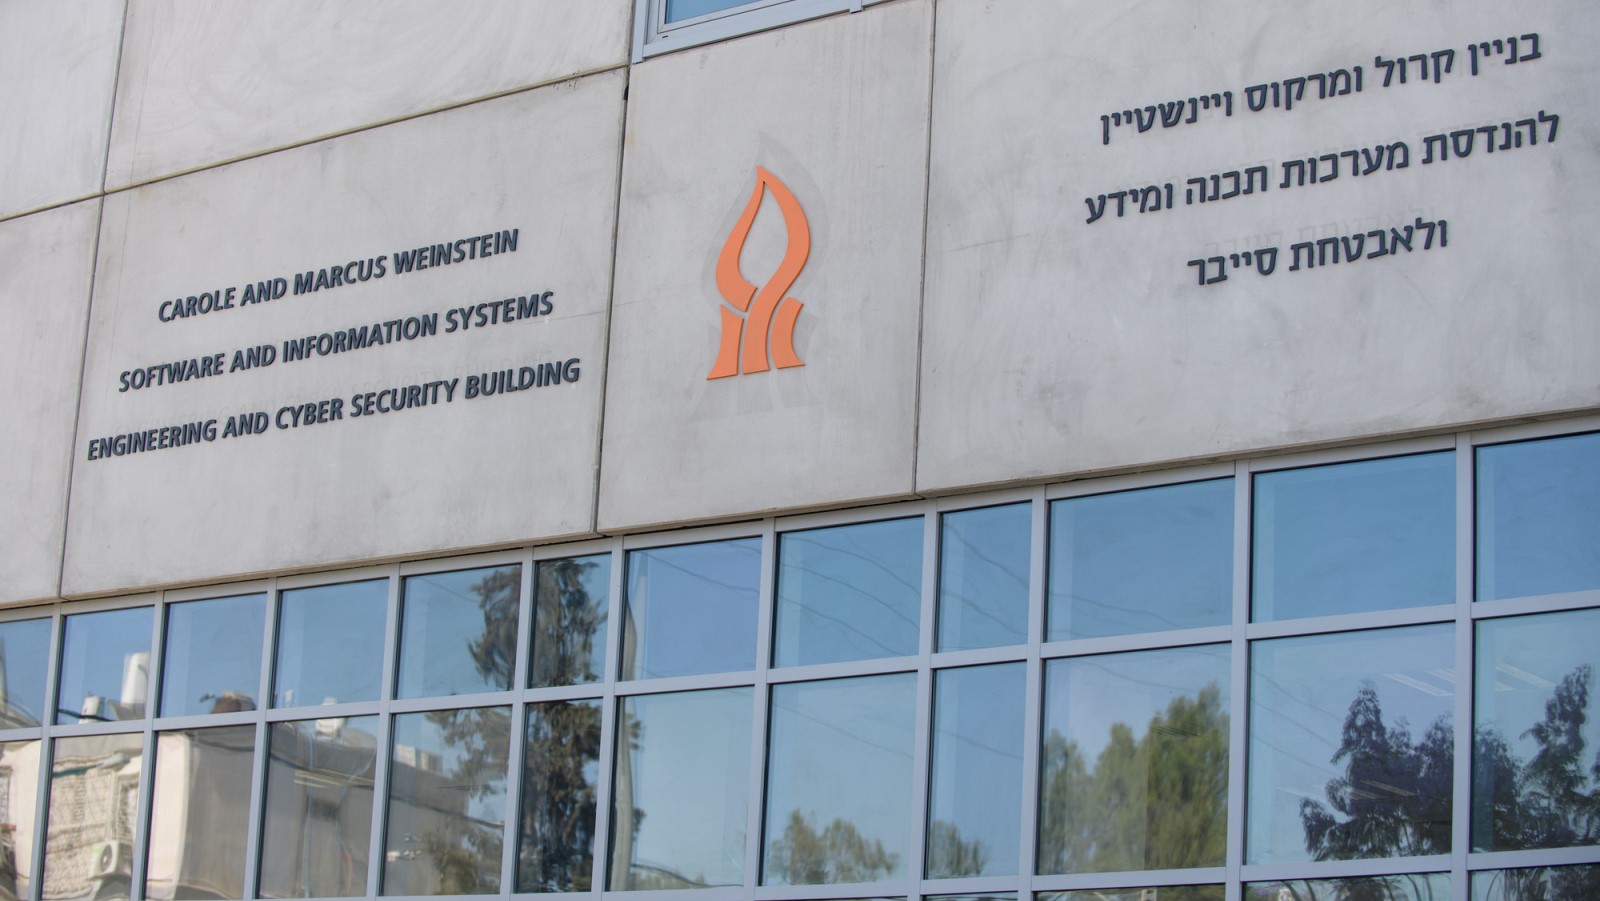 Capture the Flag hacking competition of CSAW to be held on Beersheva campus. Photo courtesy of Ben-Gurion University